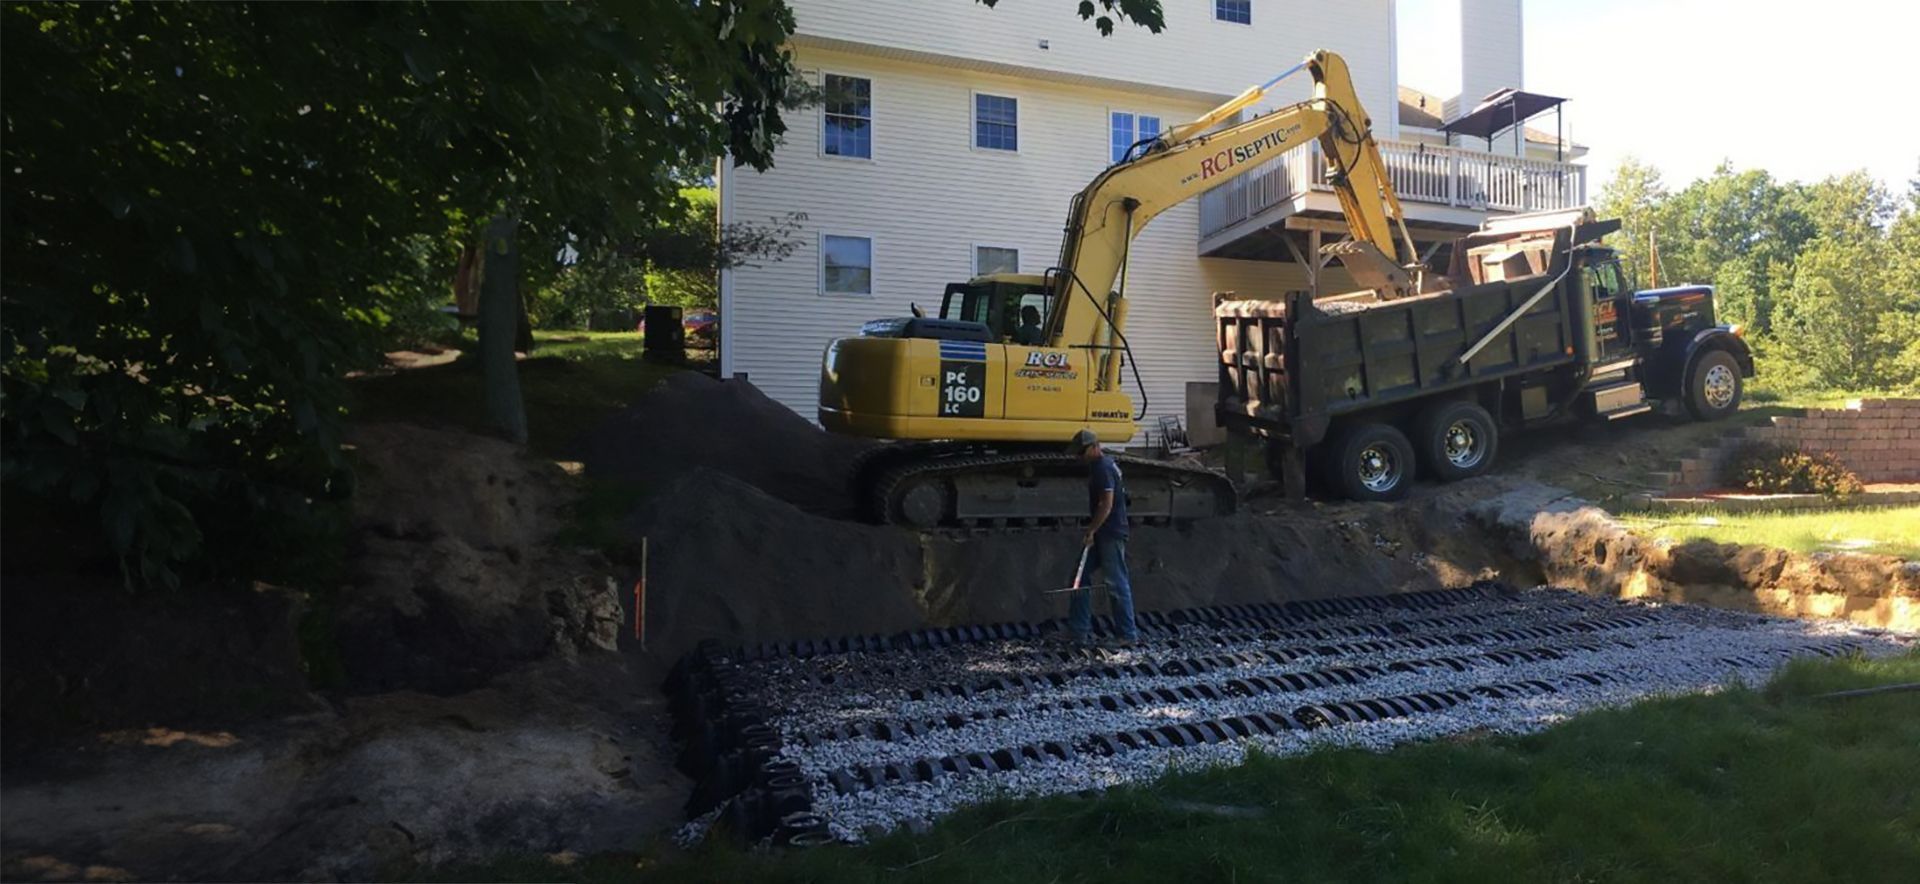 a yellow excavator is loading dirt into a dump truck in front of a house  that is getting a septic system installed